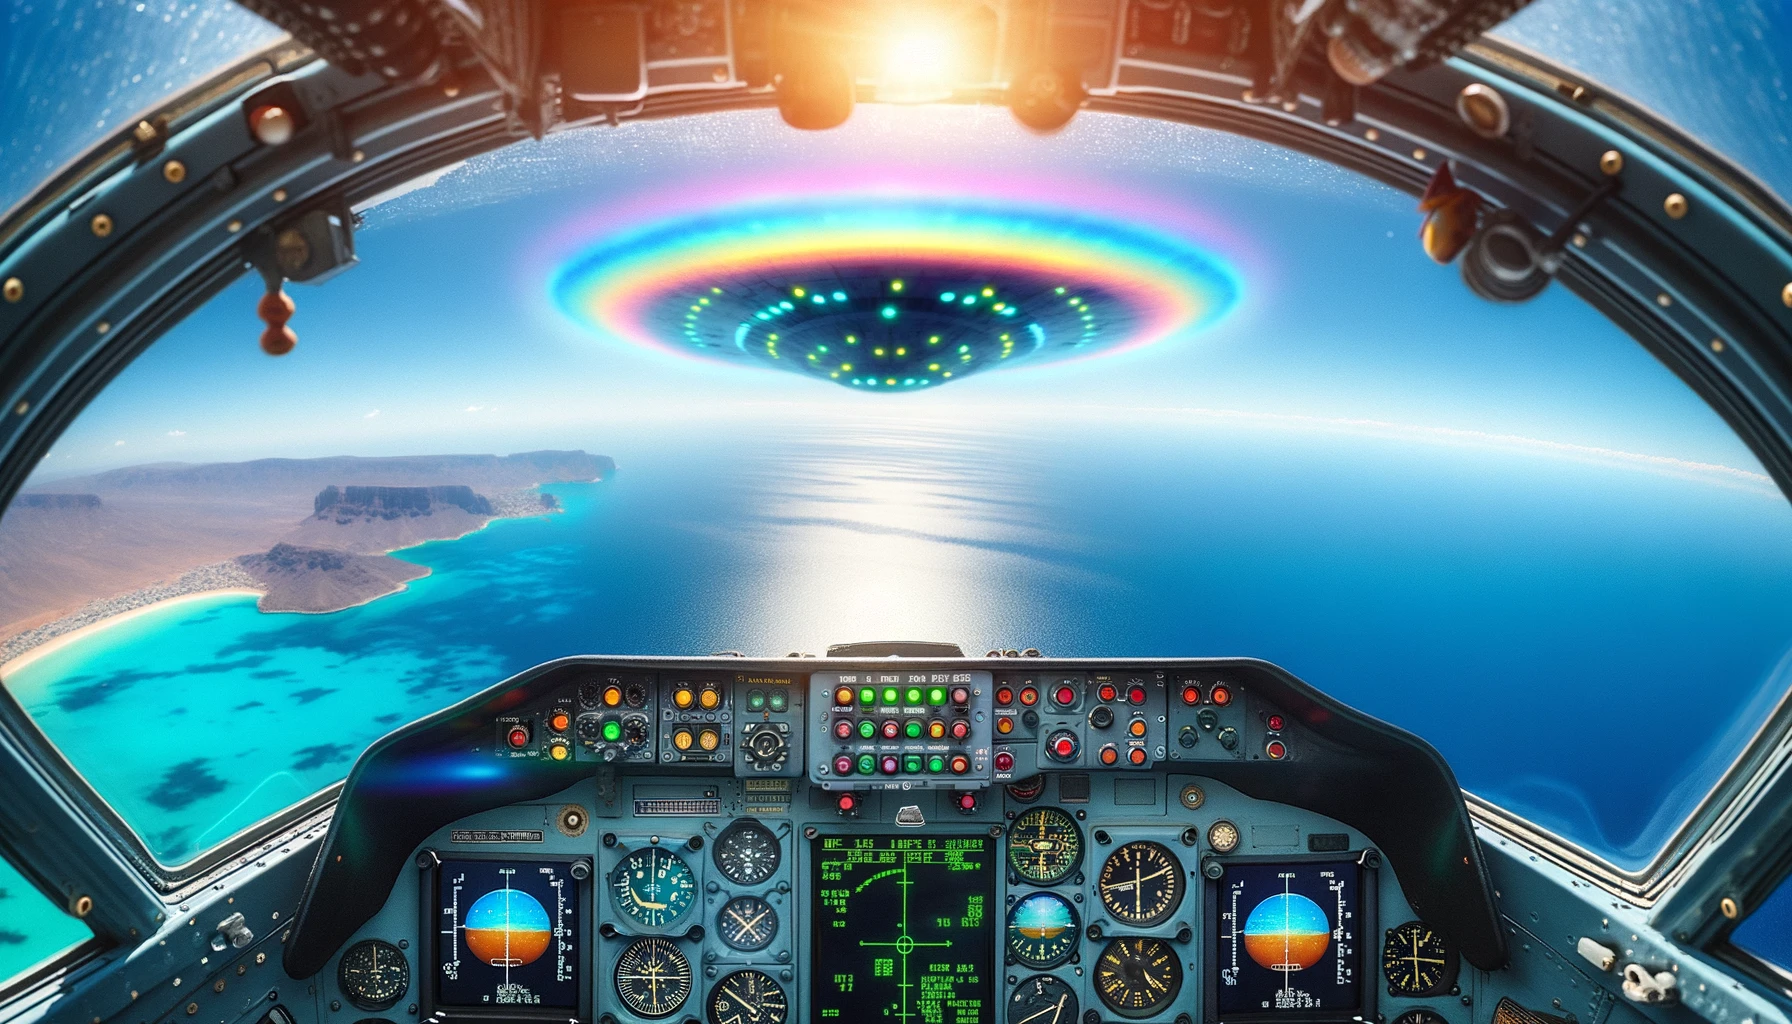 Photo capturing the moment from inside a fighter jet cockpit as a pilot witnesses a unique sight: a UFO with a spectrum of rainbow colors. Beneath, the azure ocean stretches out, reflecting the sun's rays.